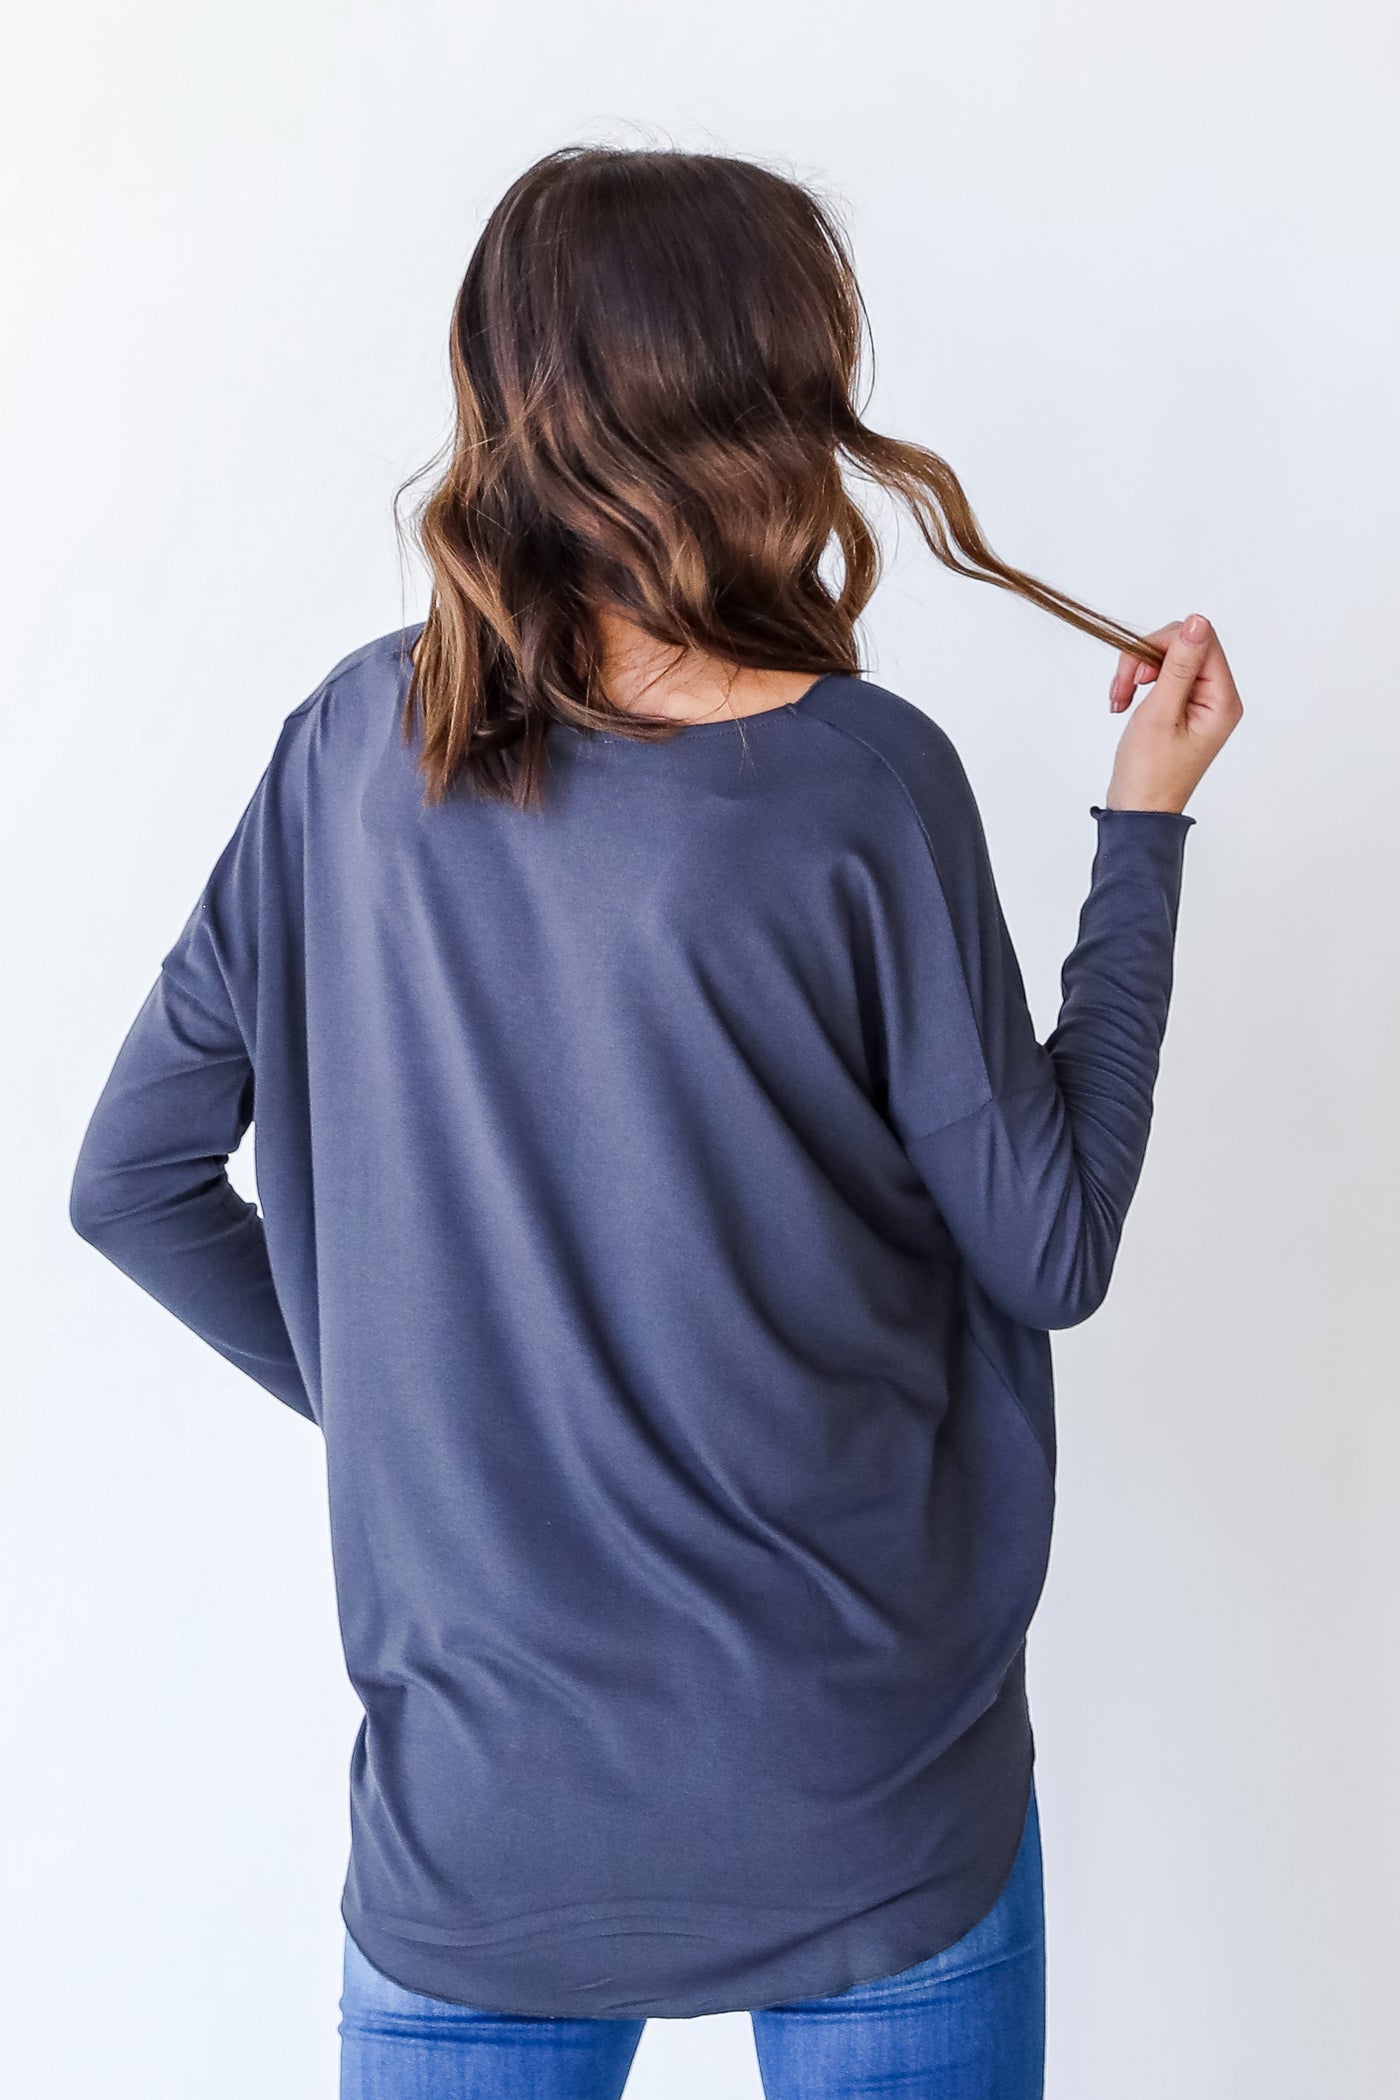 Surplice Top in charcoal back view